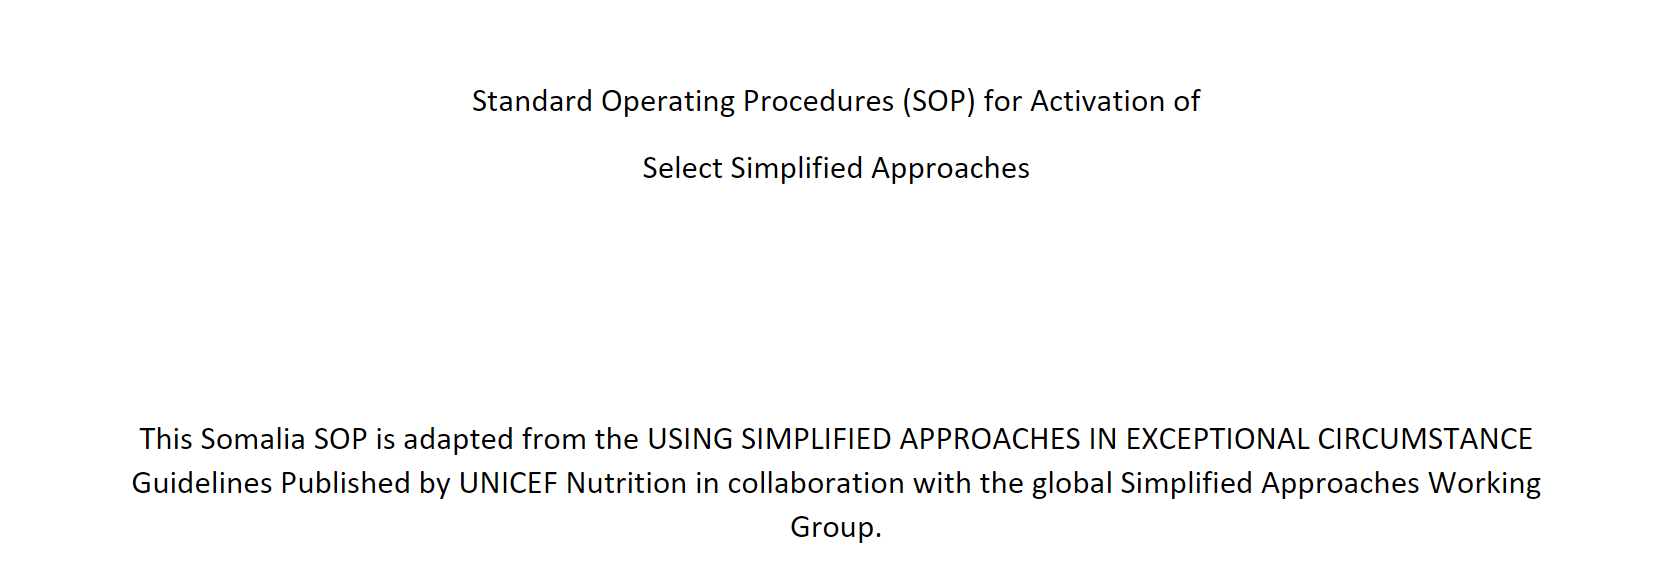 Somalia  Standard of Operating Procedure for activation of Simplified Approaches 